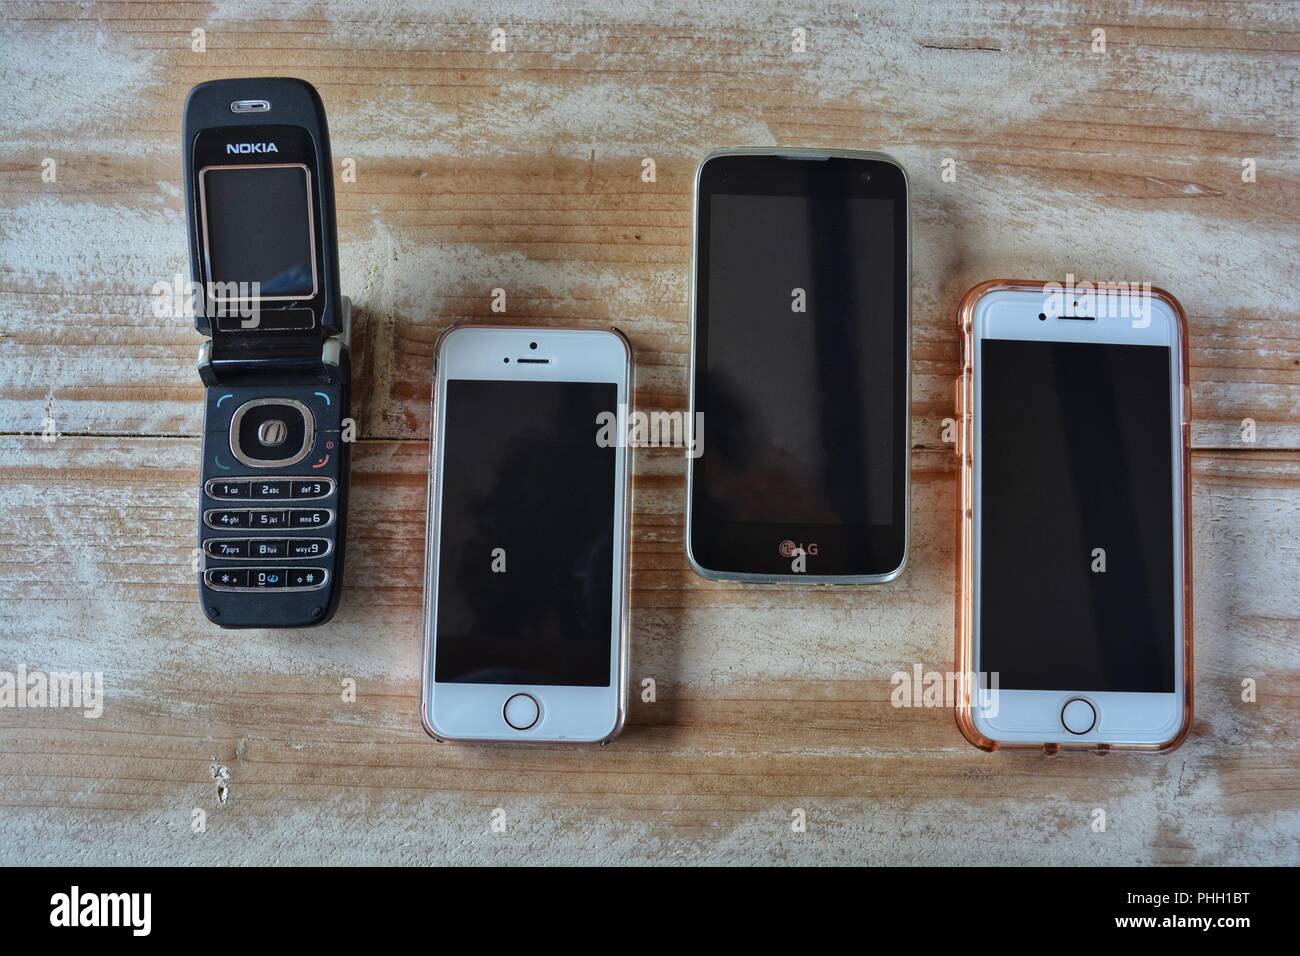 Nokia flip top phone, iPhone XE,  LG phone and  iPhone7 on a wooden tabletop with copy space Stock Photo